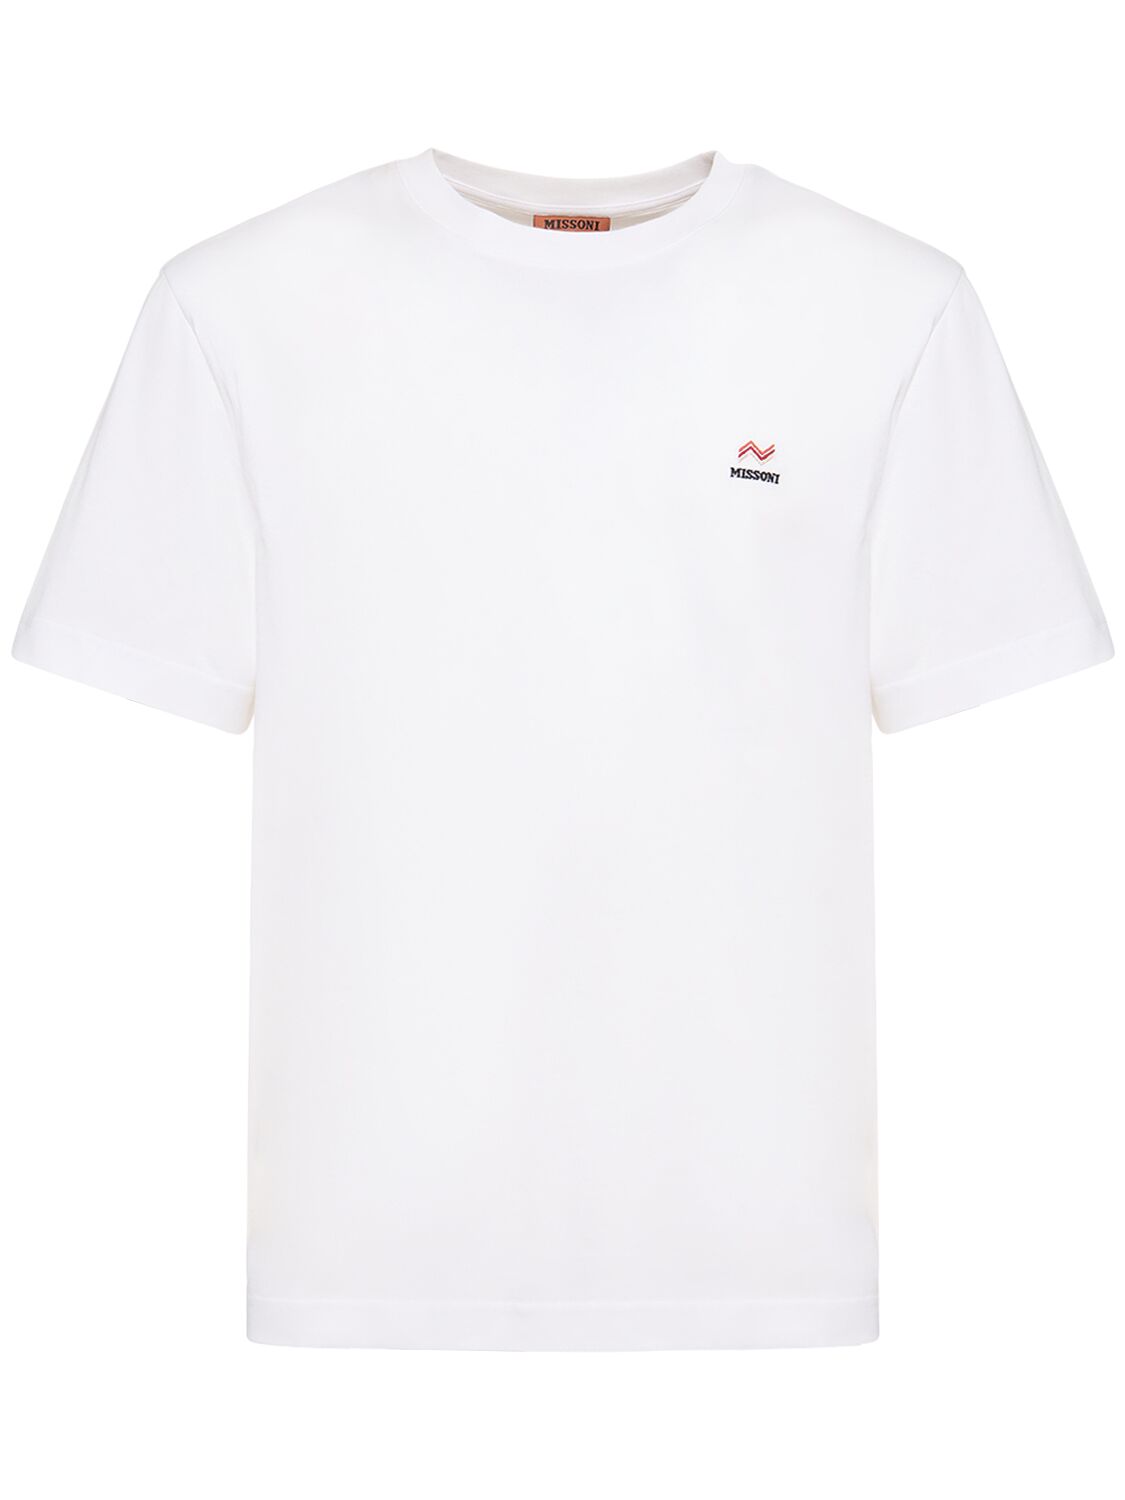 Missoni Logo Embroidery Cotton Jersey T-shirt In White